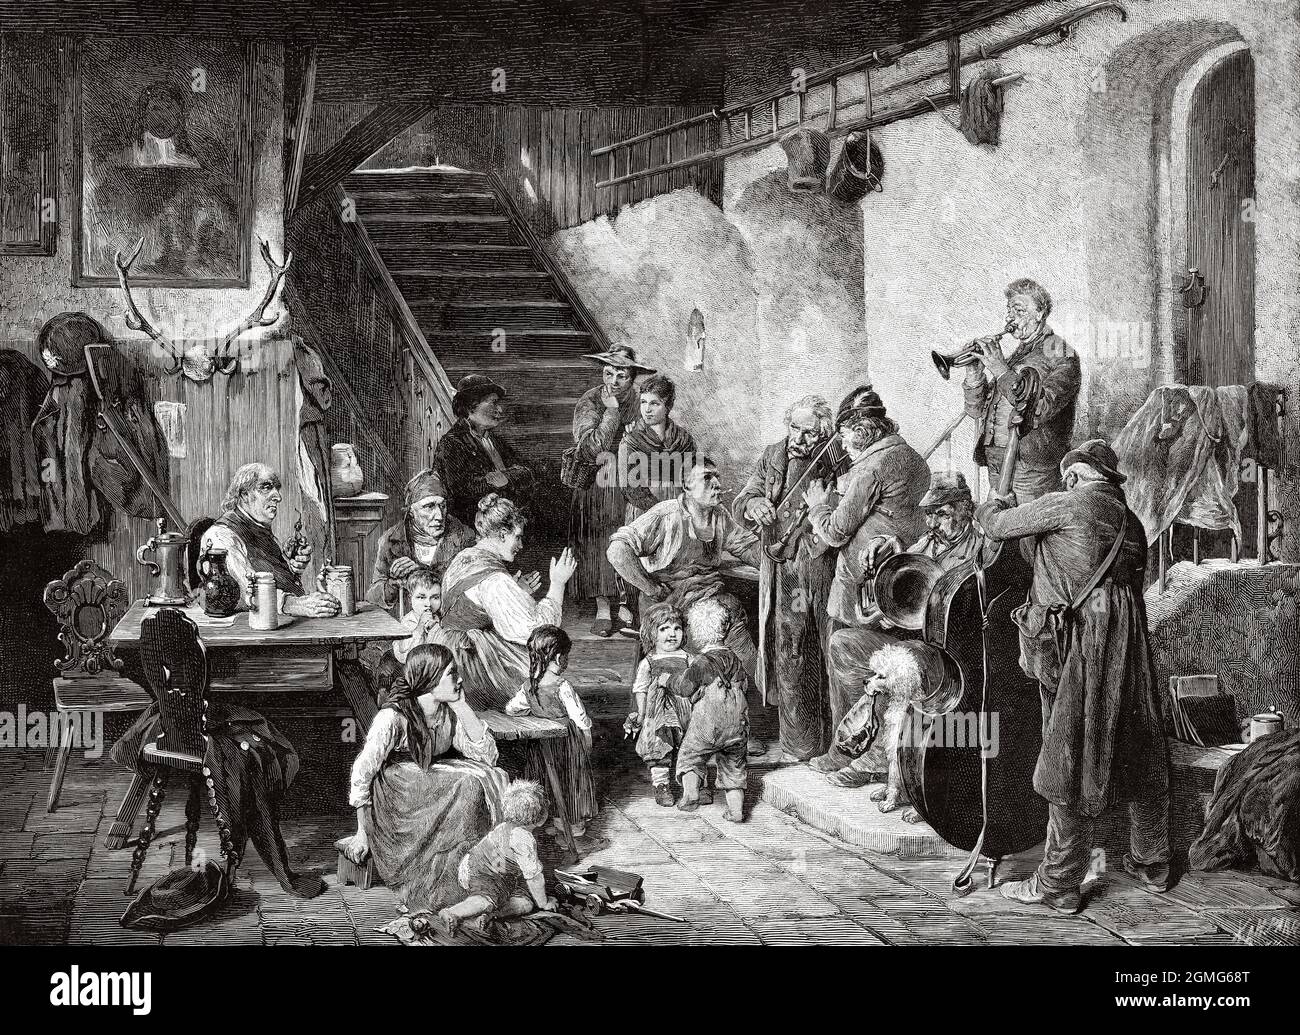 Traveling musicians playing in a tavern, painting by Hugo Wilhelm Kauffmann (1844-1915) was a German painter. Old 19th century engraved illustration from La Ilustración Artística 1882 Stock Photo